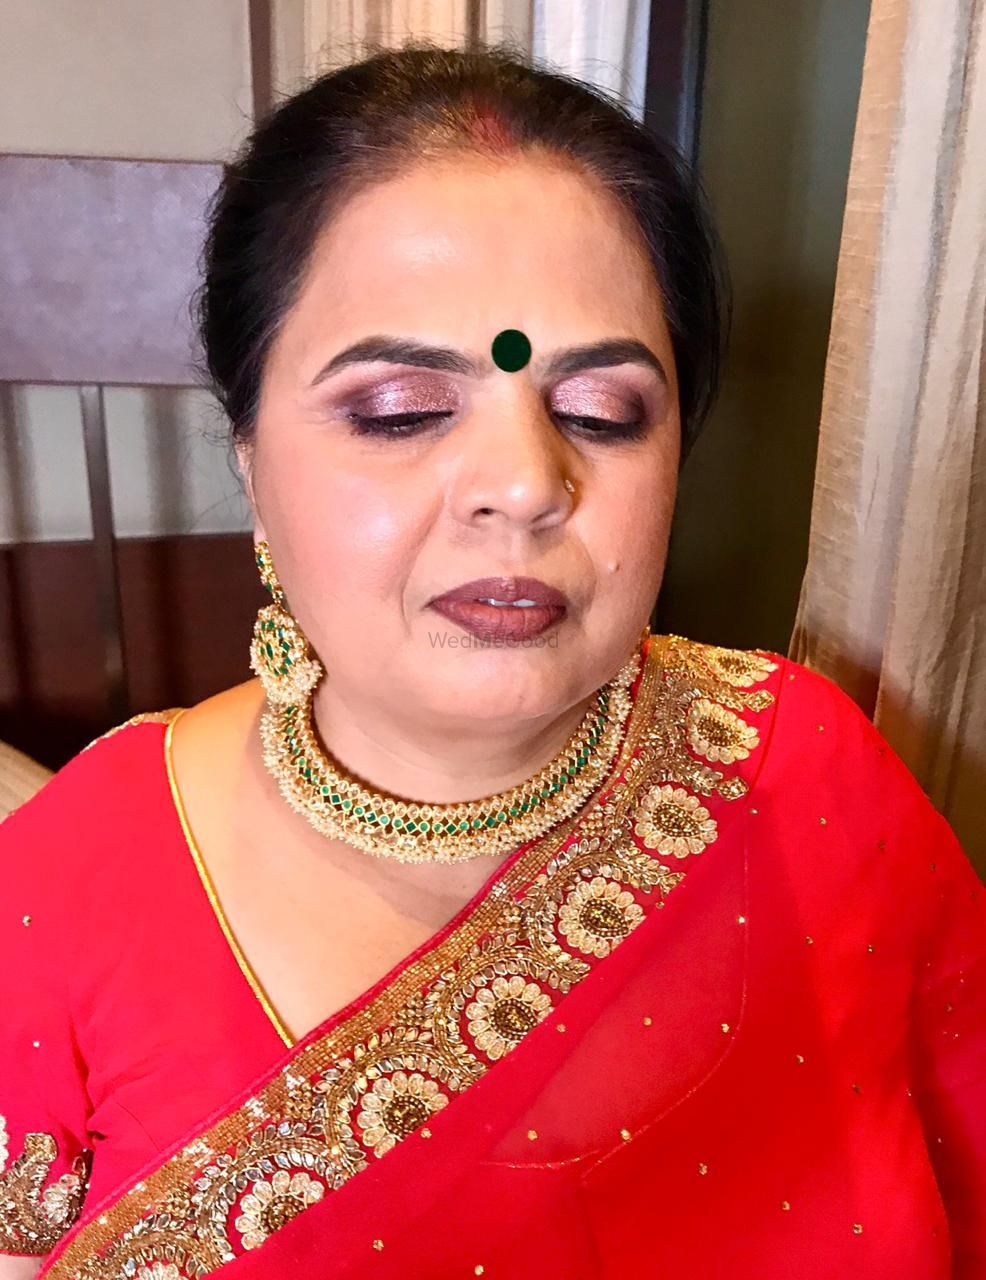 Photo From MATURE SKIN MAKEUP - By Babe to Bride